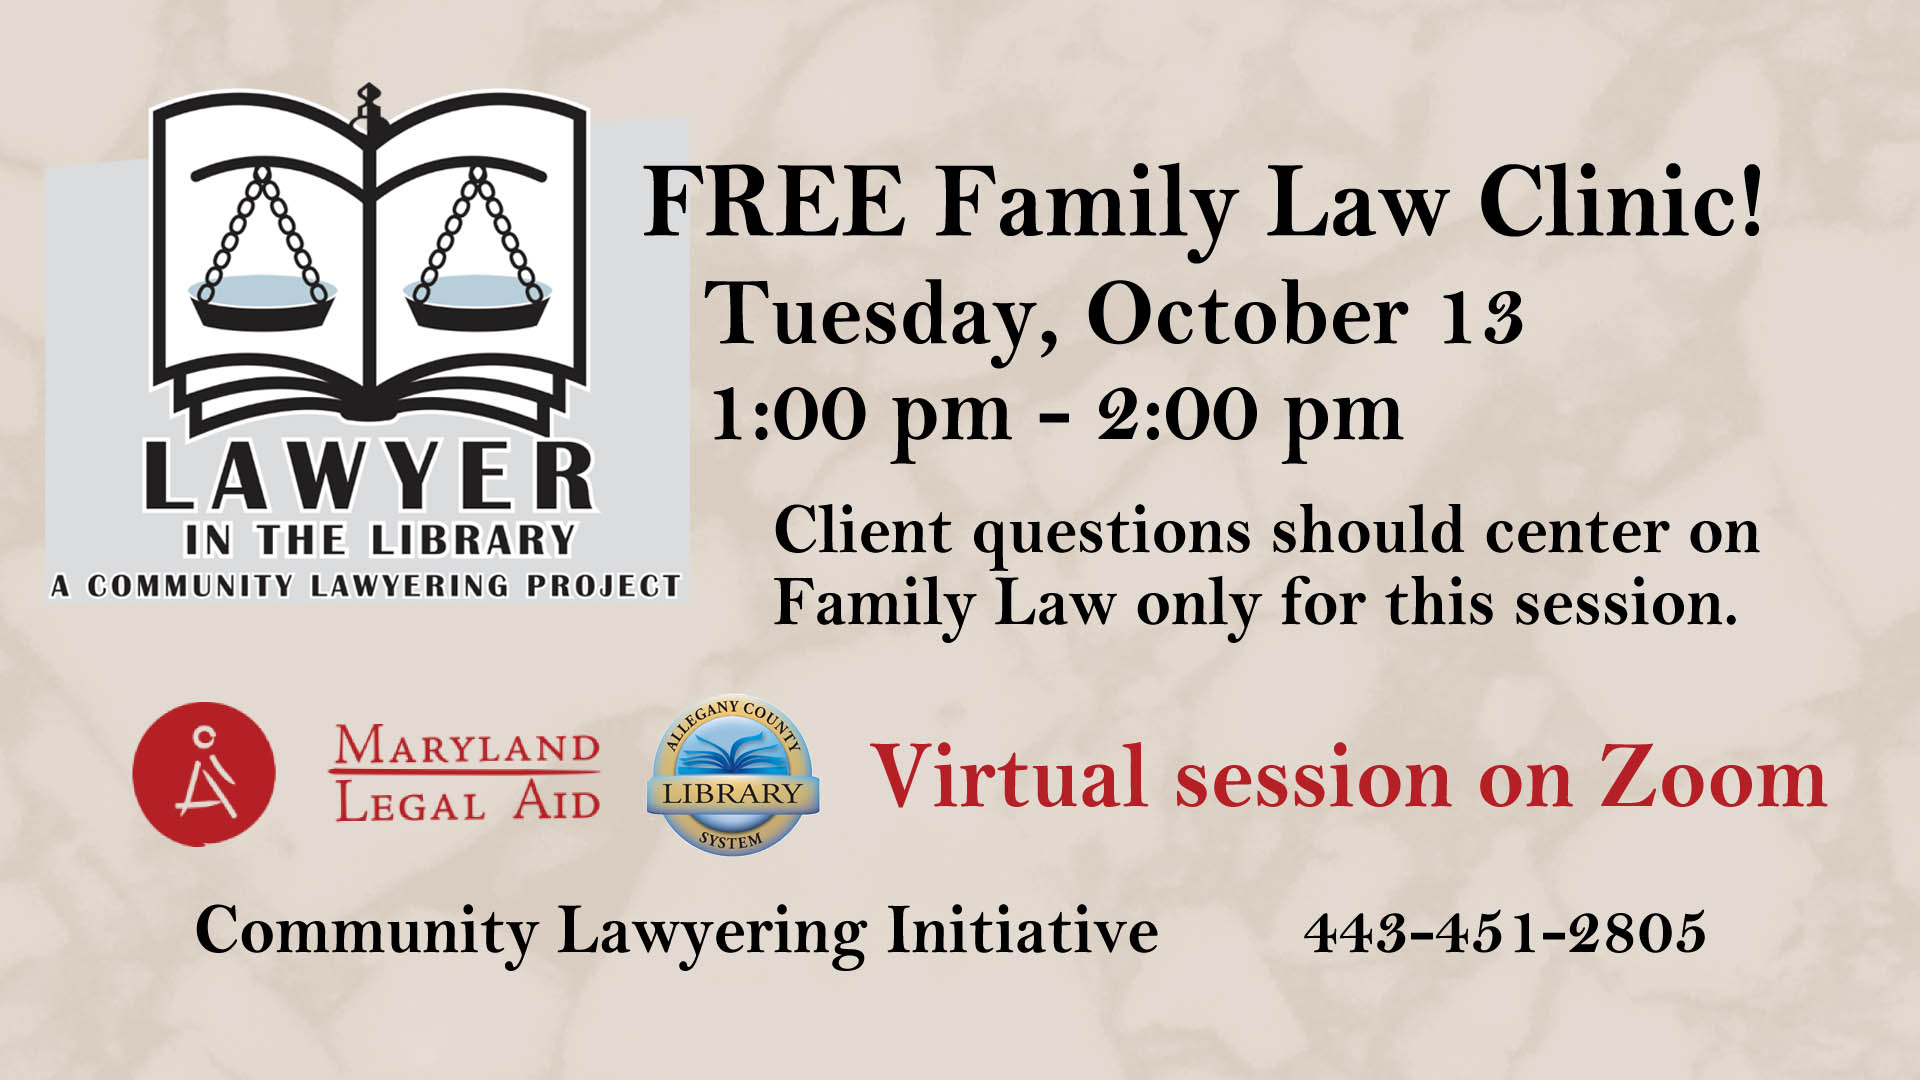 Free Family Law Clinic